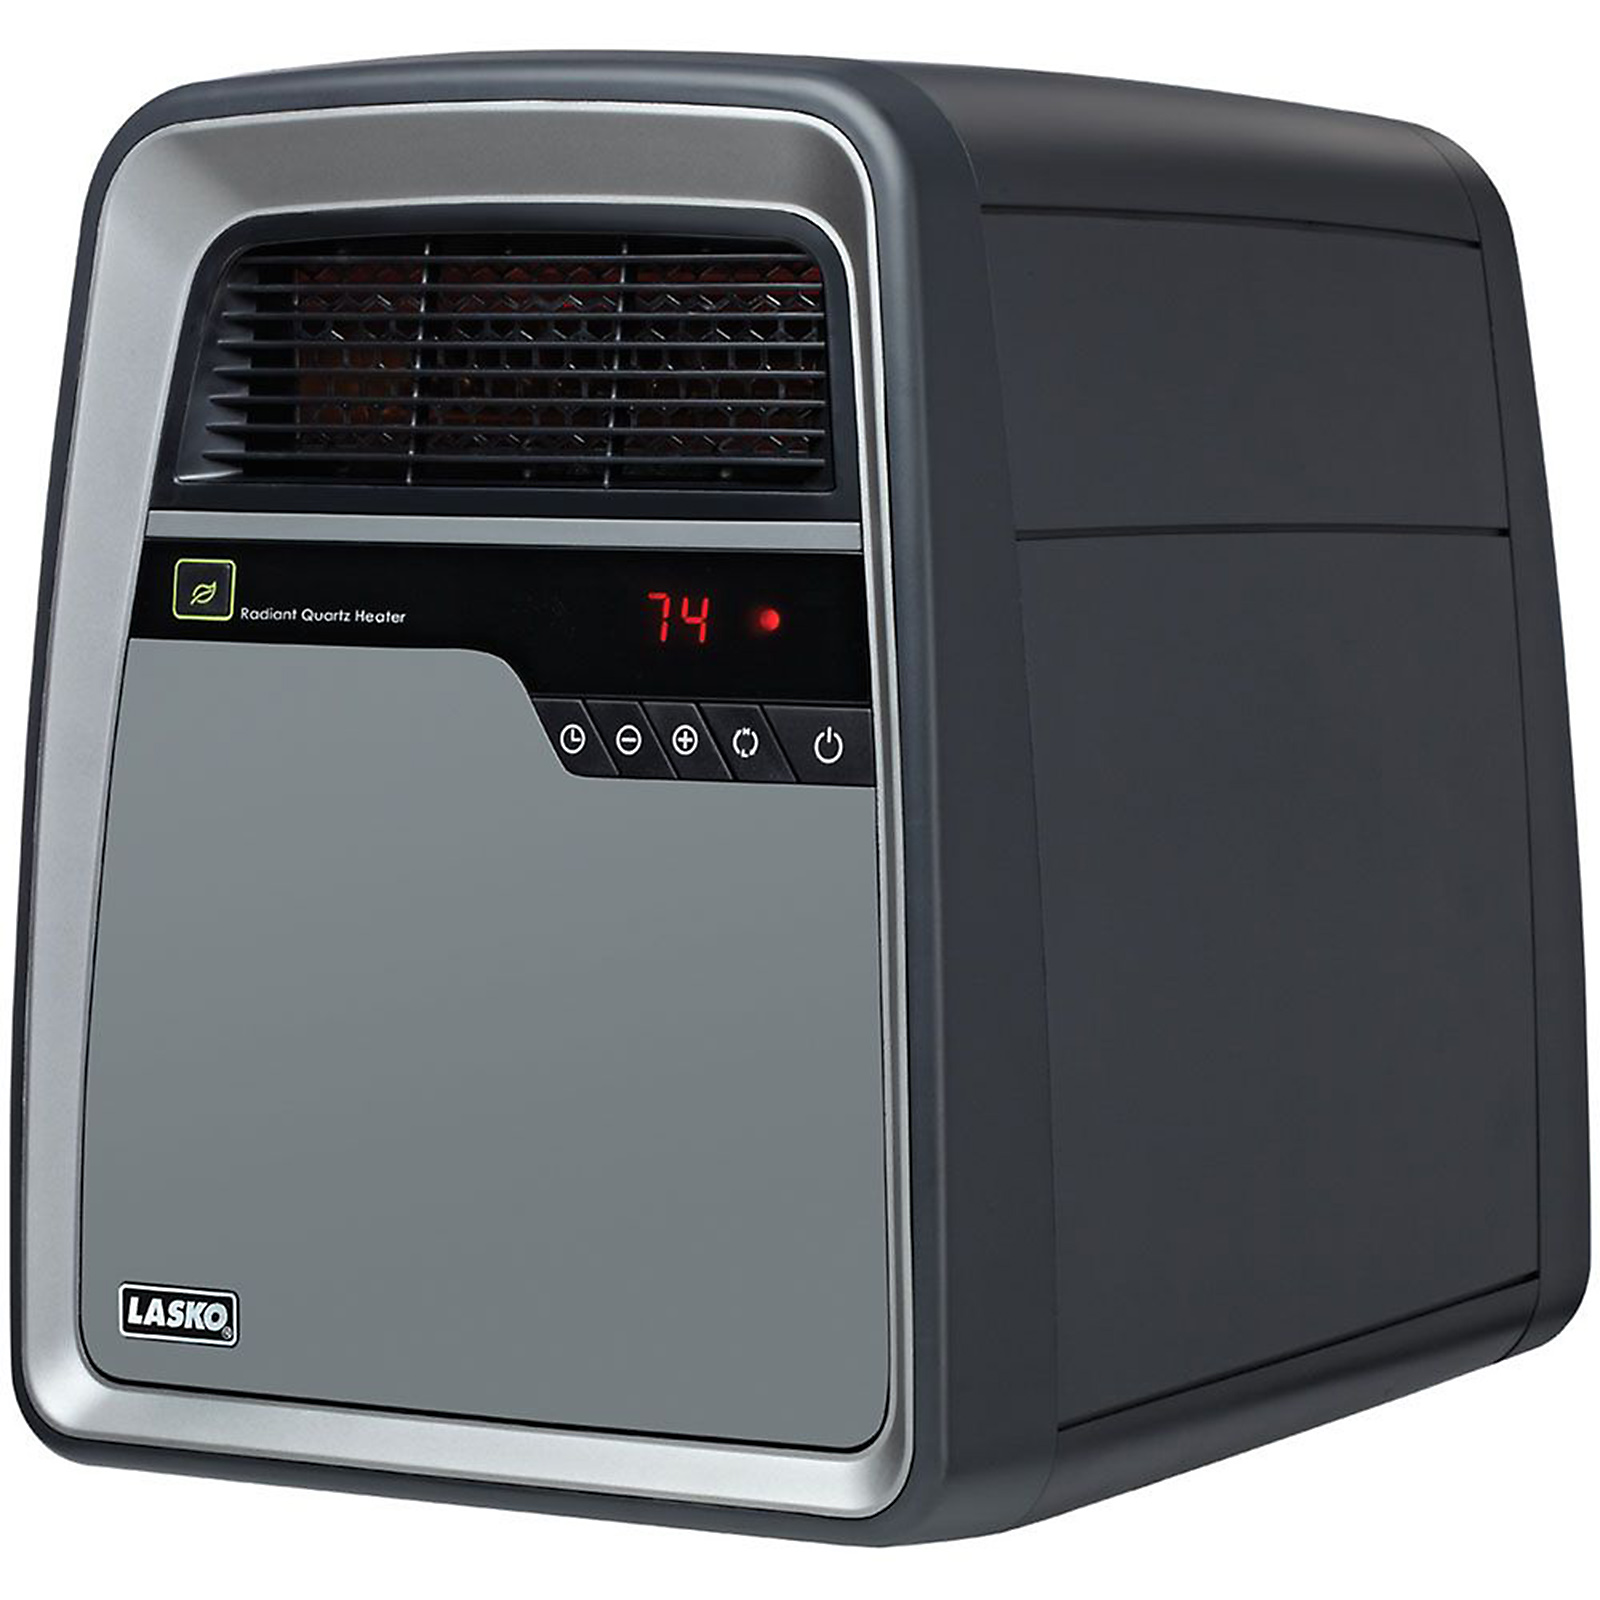 Lasko Products 6101 Cool-Touch Infrared Quartz Heater with Save-Smart Technology